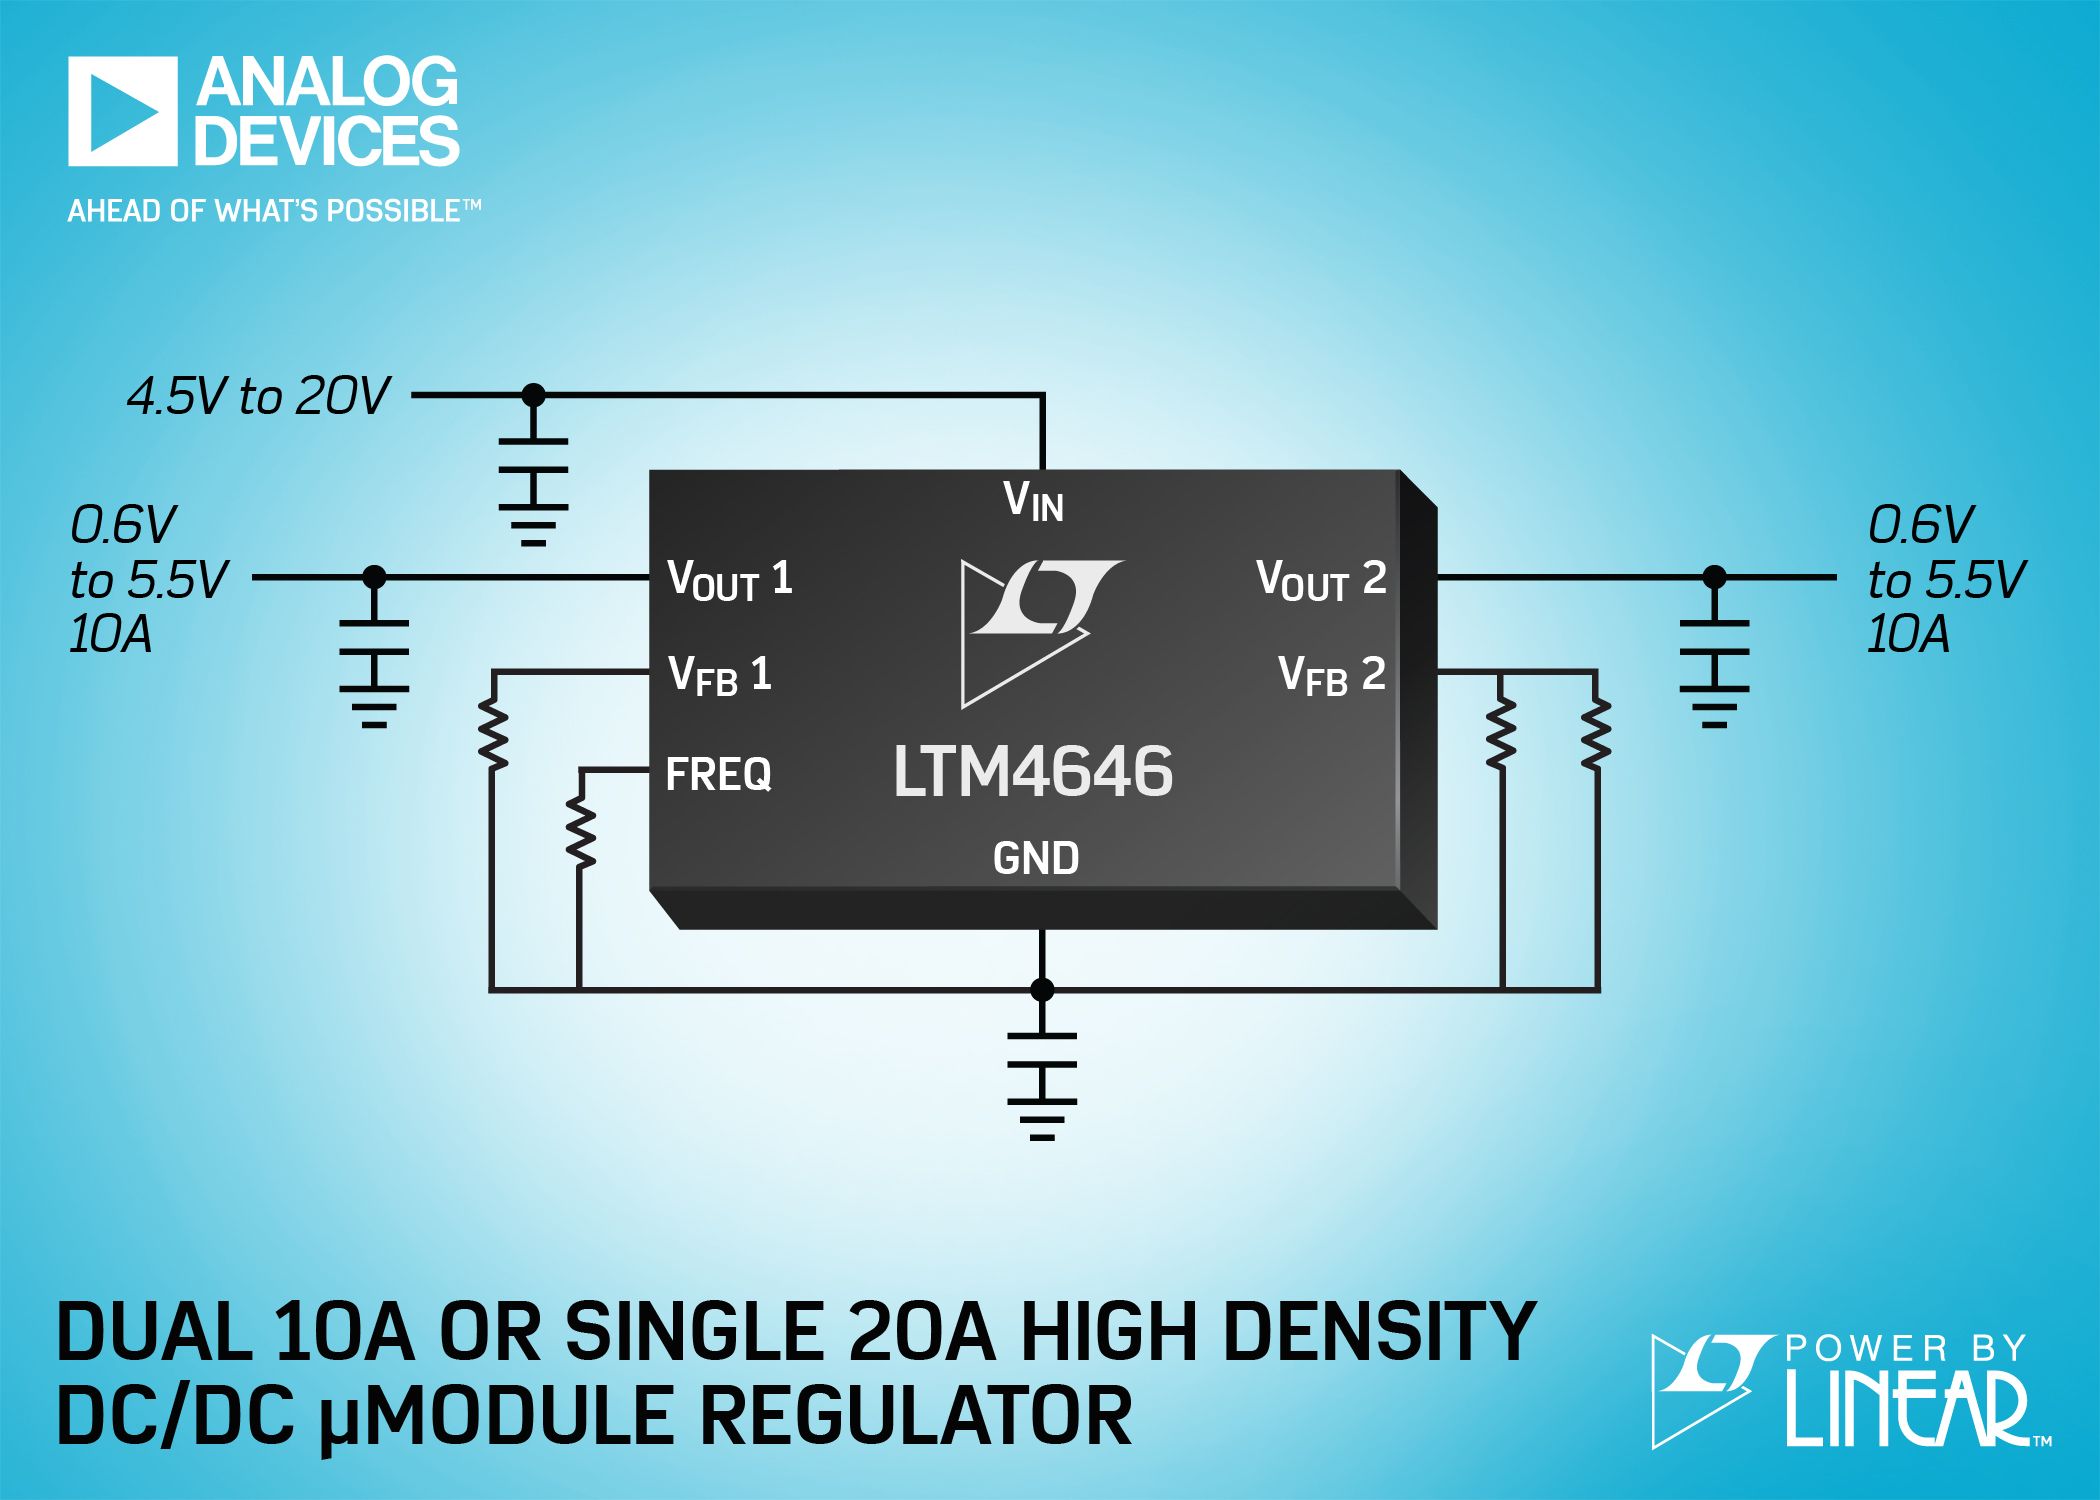 Compact µModule regulator is for use with FPGAs, GPUs and ASICs